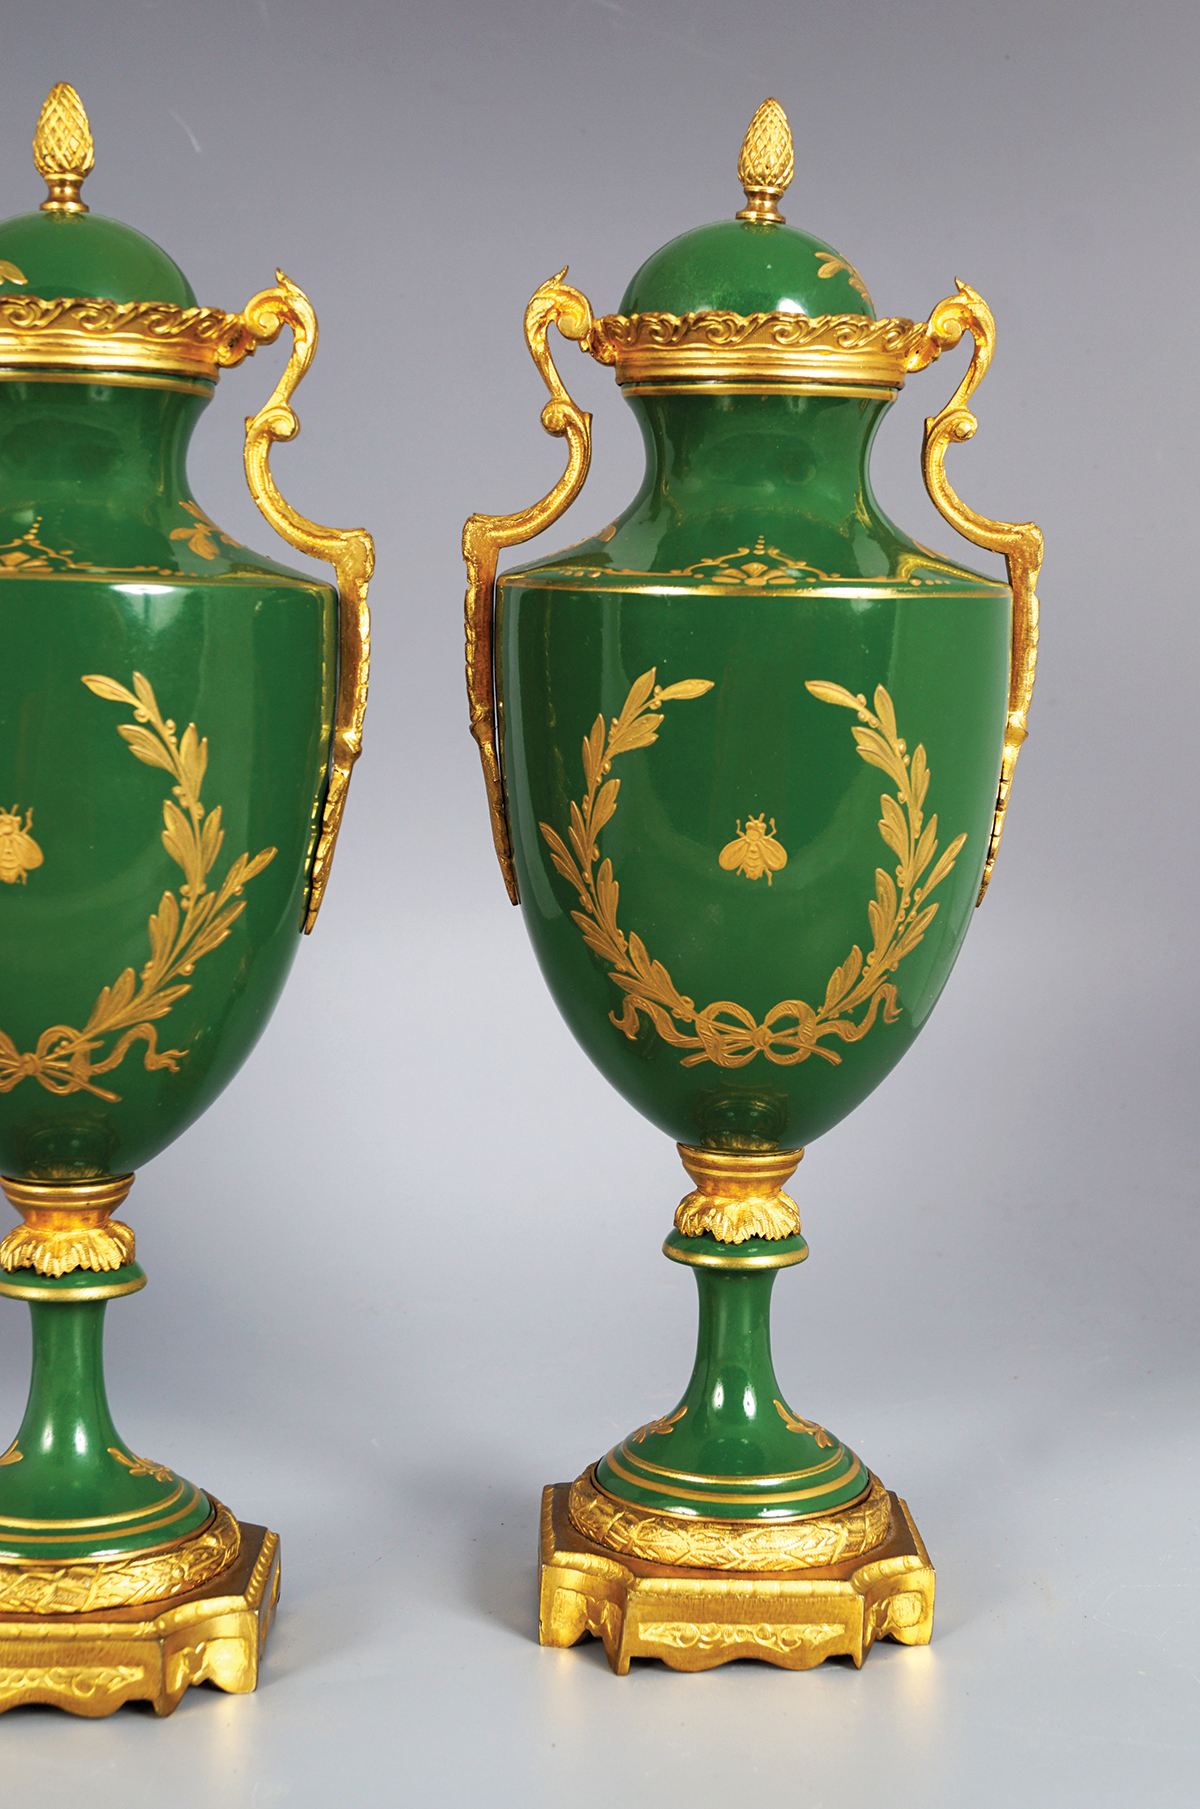 PAIR OF 19th-CENTURY SEVRES URNS AND COVERS - Image 8 of 12